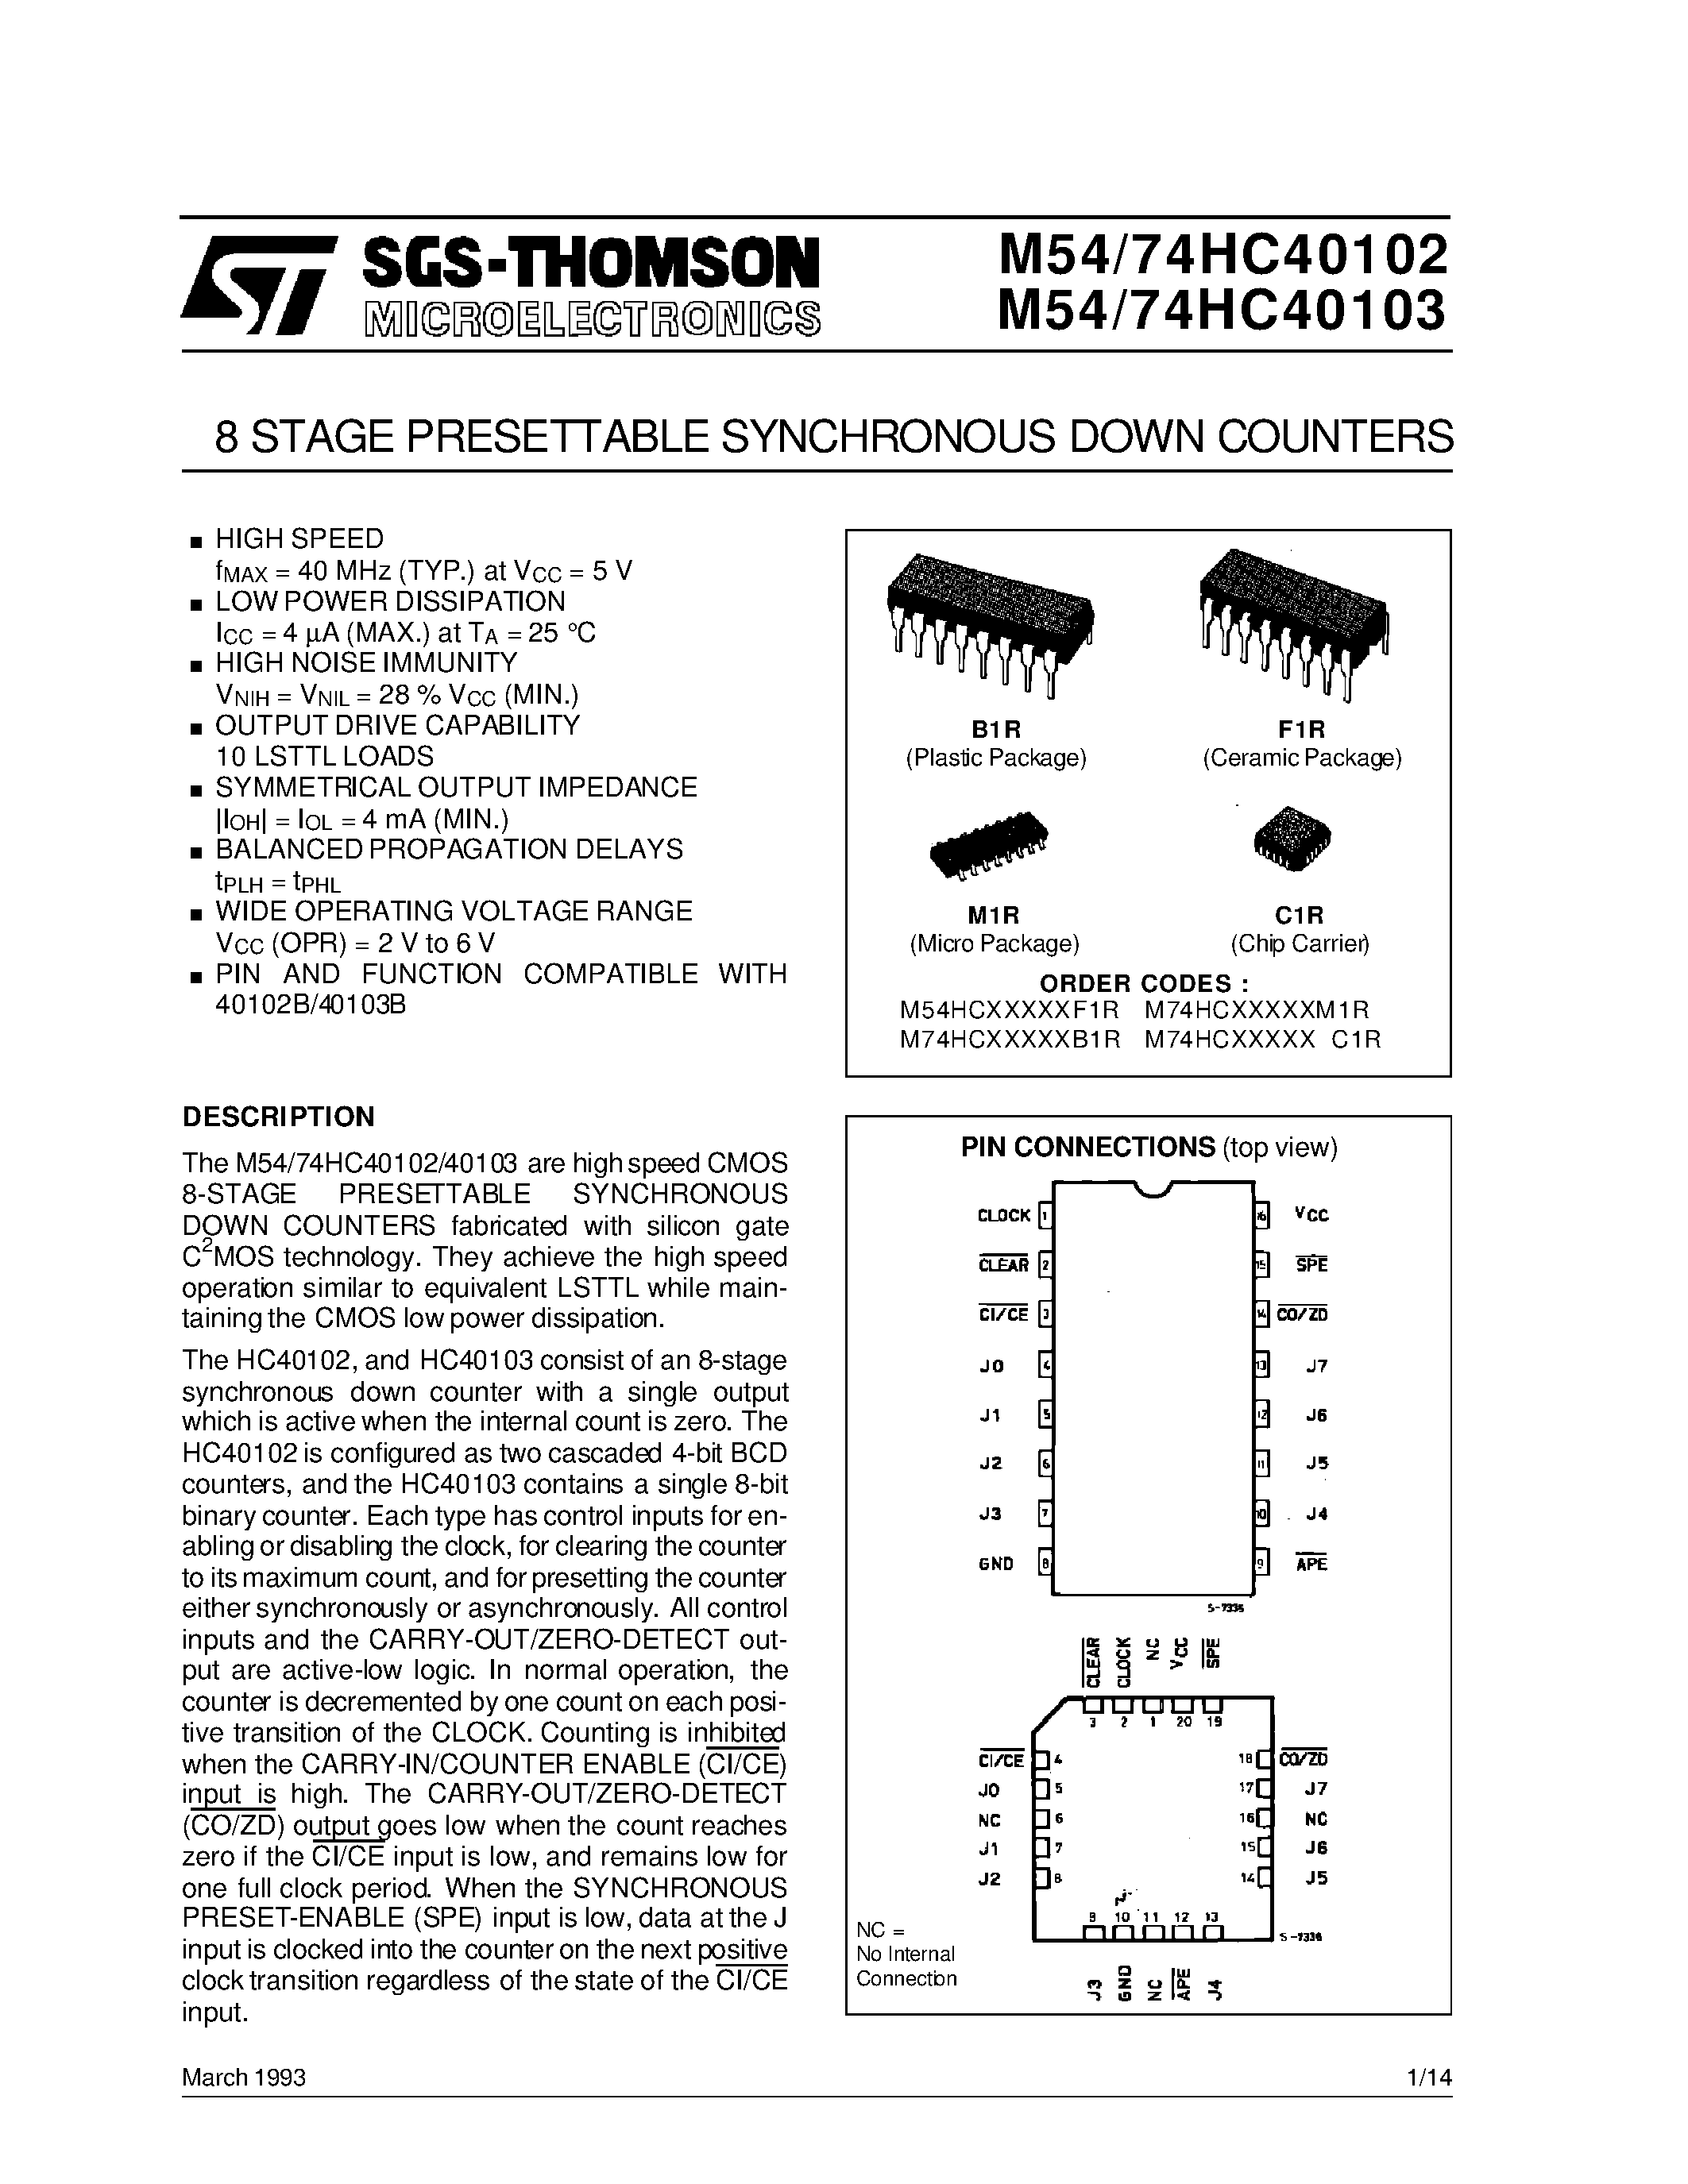 Datasheet M74HC40102 - 8 STAGE PRESETTABLE SYNCHRONOUS DOWN COUNTERS page 1